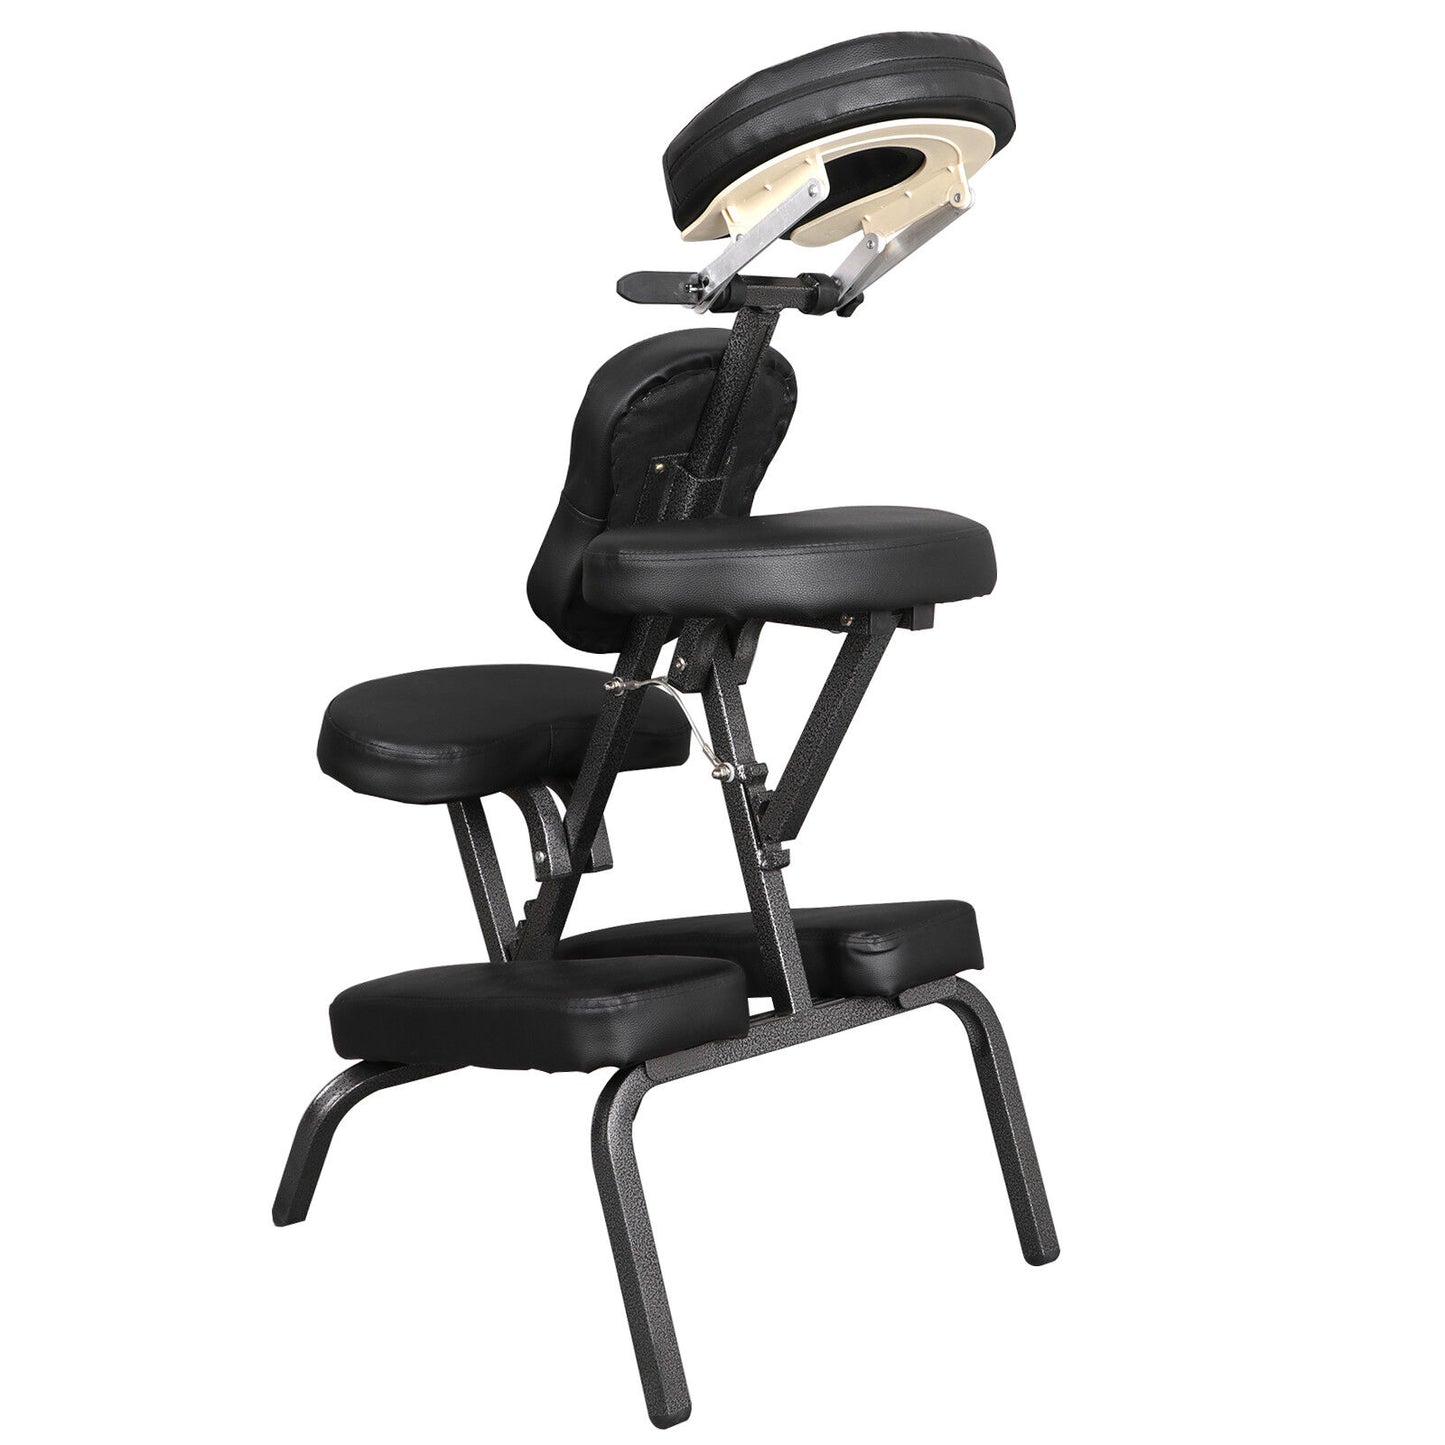 Portable Massage Chair Foldable Tattoo Therapy Chair PU Leather Pad Spa Salon